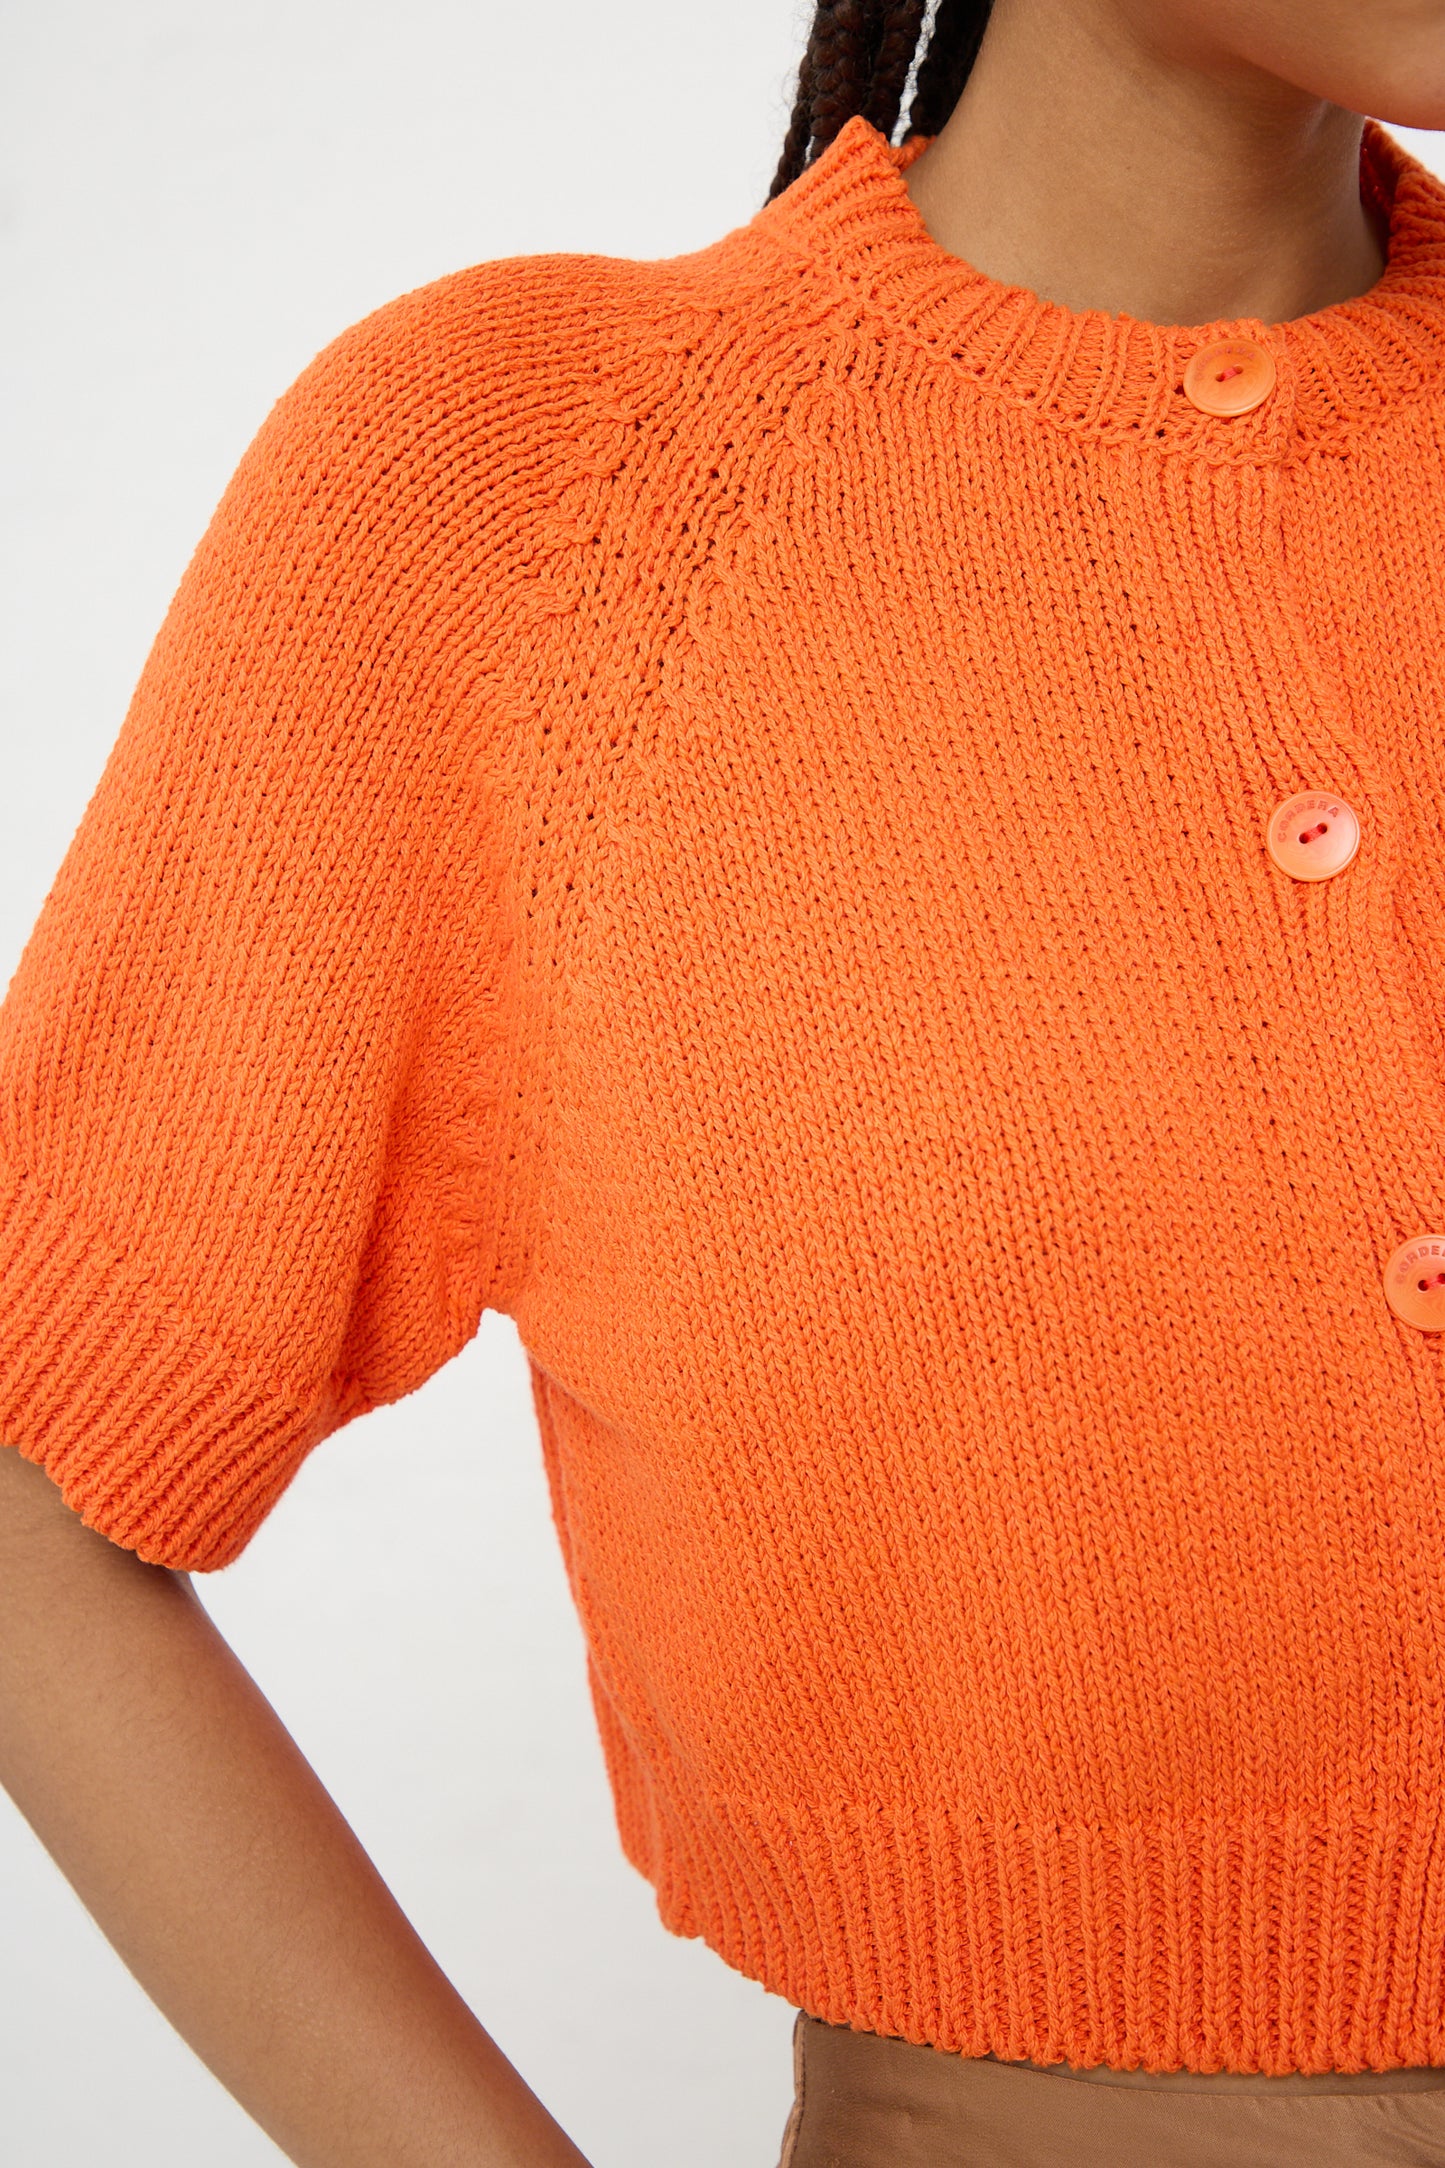 Close-up of a person wearing a Mandarina Cotton Knit Buttoned Top by Cordera made in Spain.